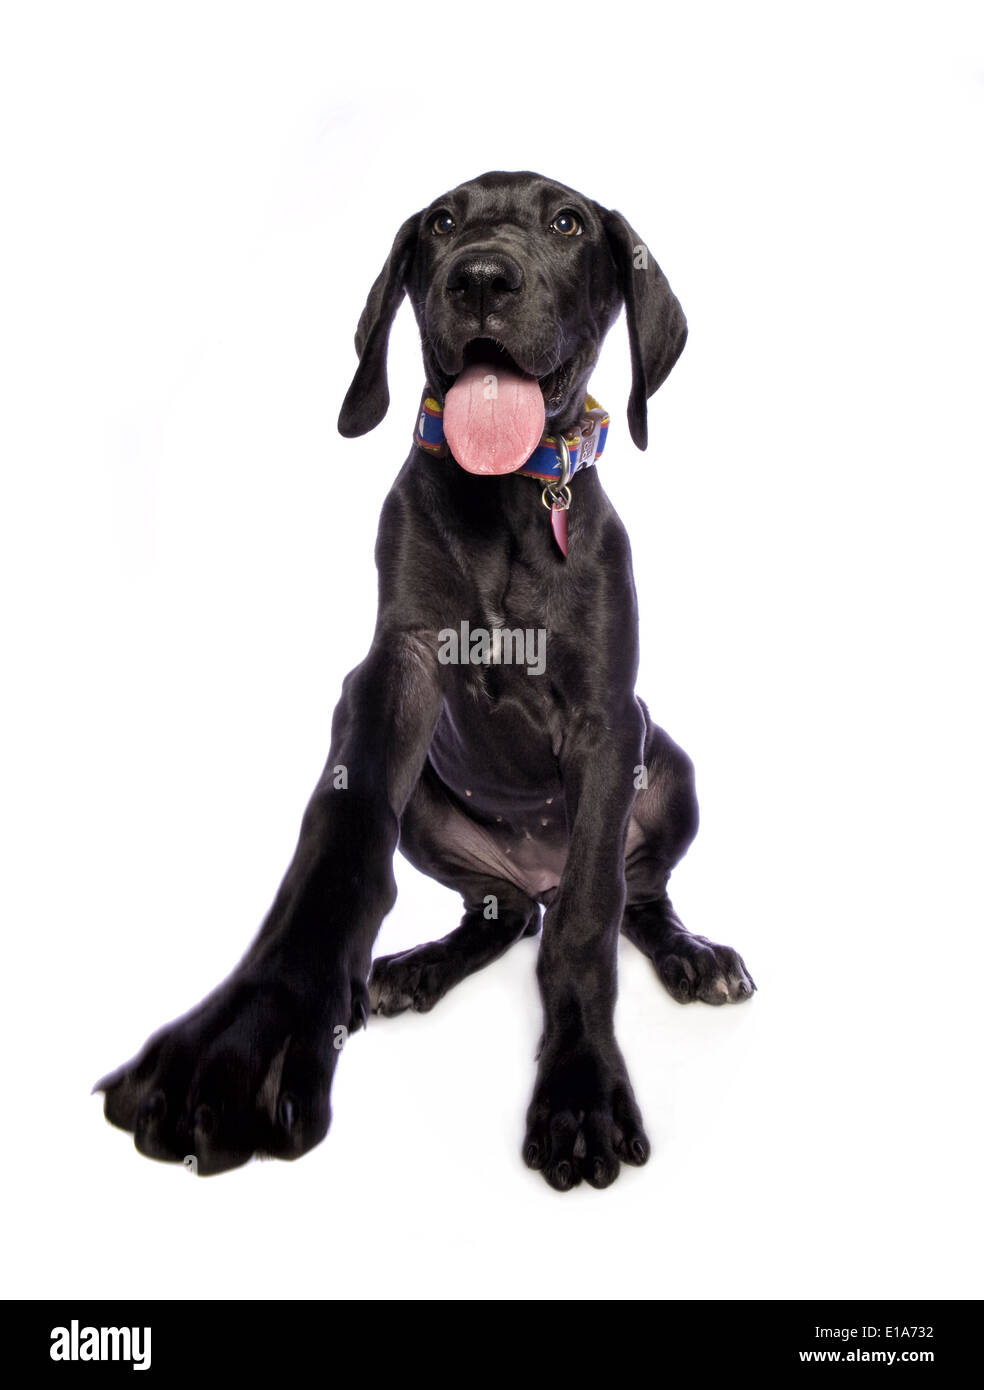 Adorable black Great Dane puppy with big paw out isolated on white background Stock Photo